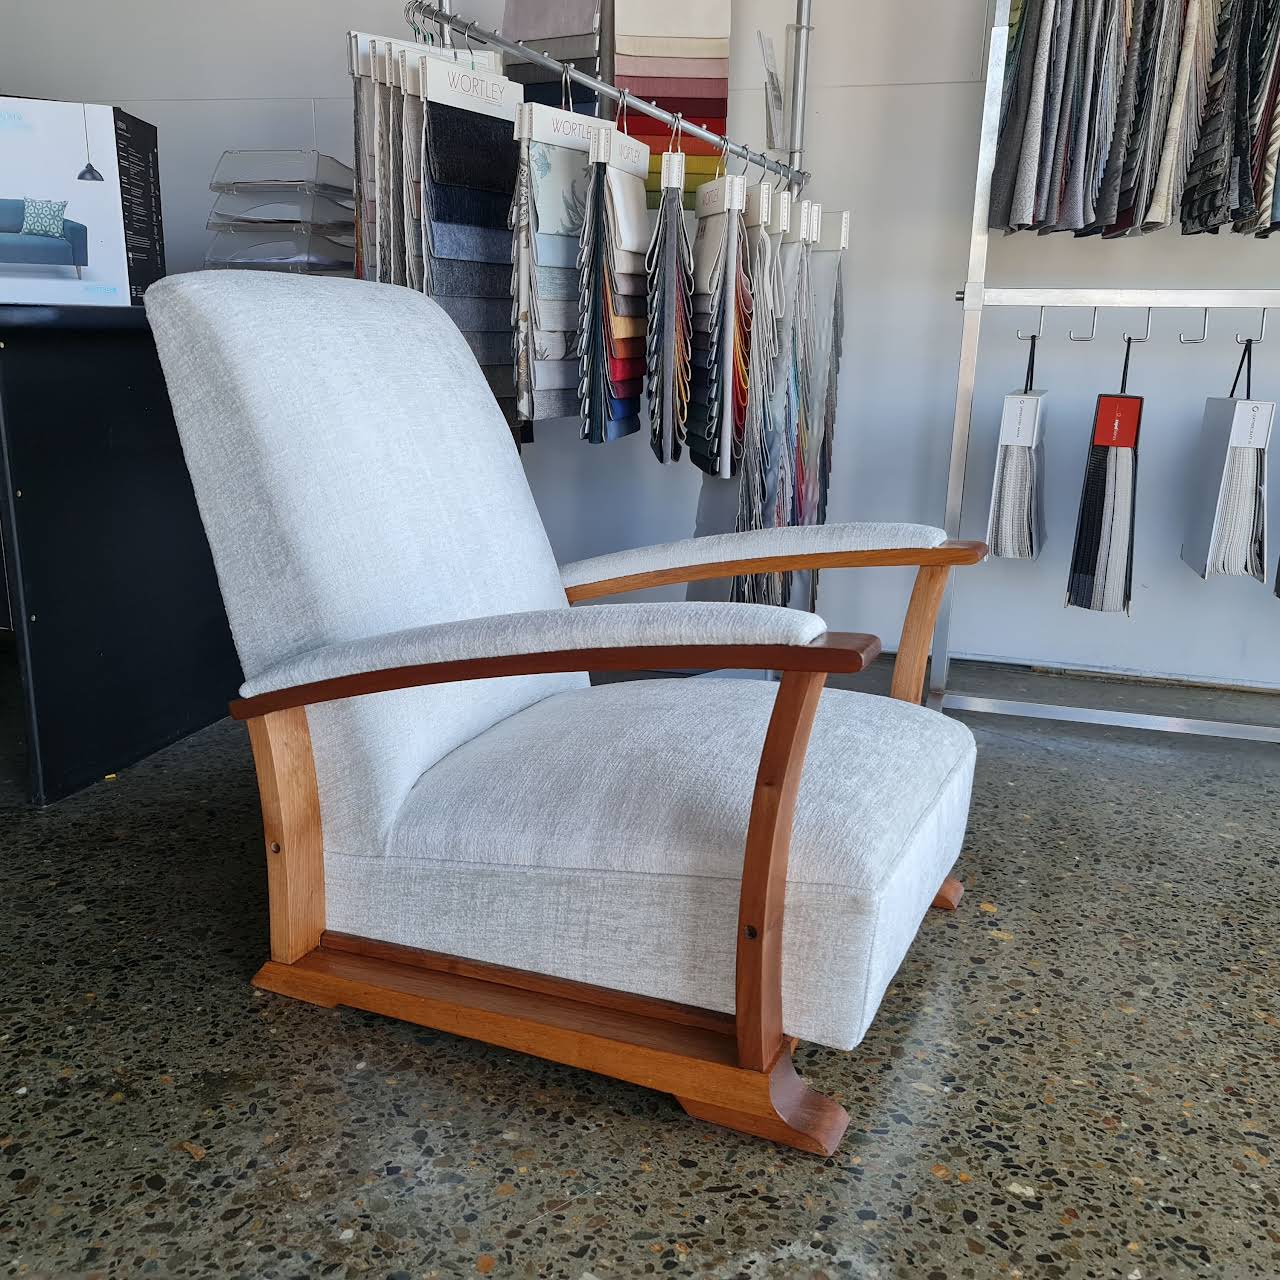 First Edition Upholstery Coast - Shop in Miami